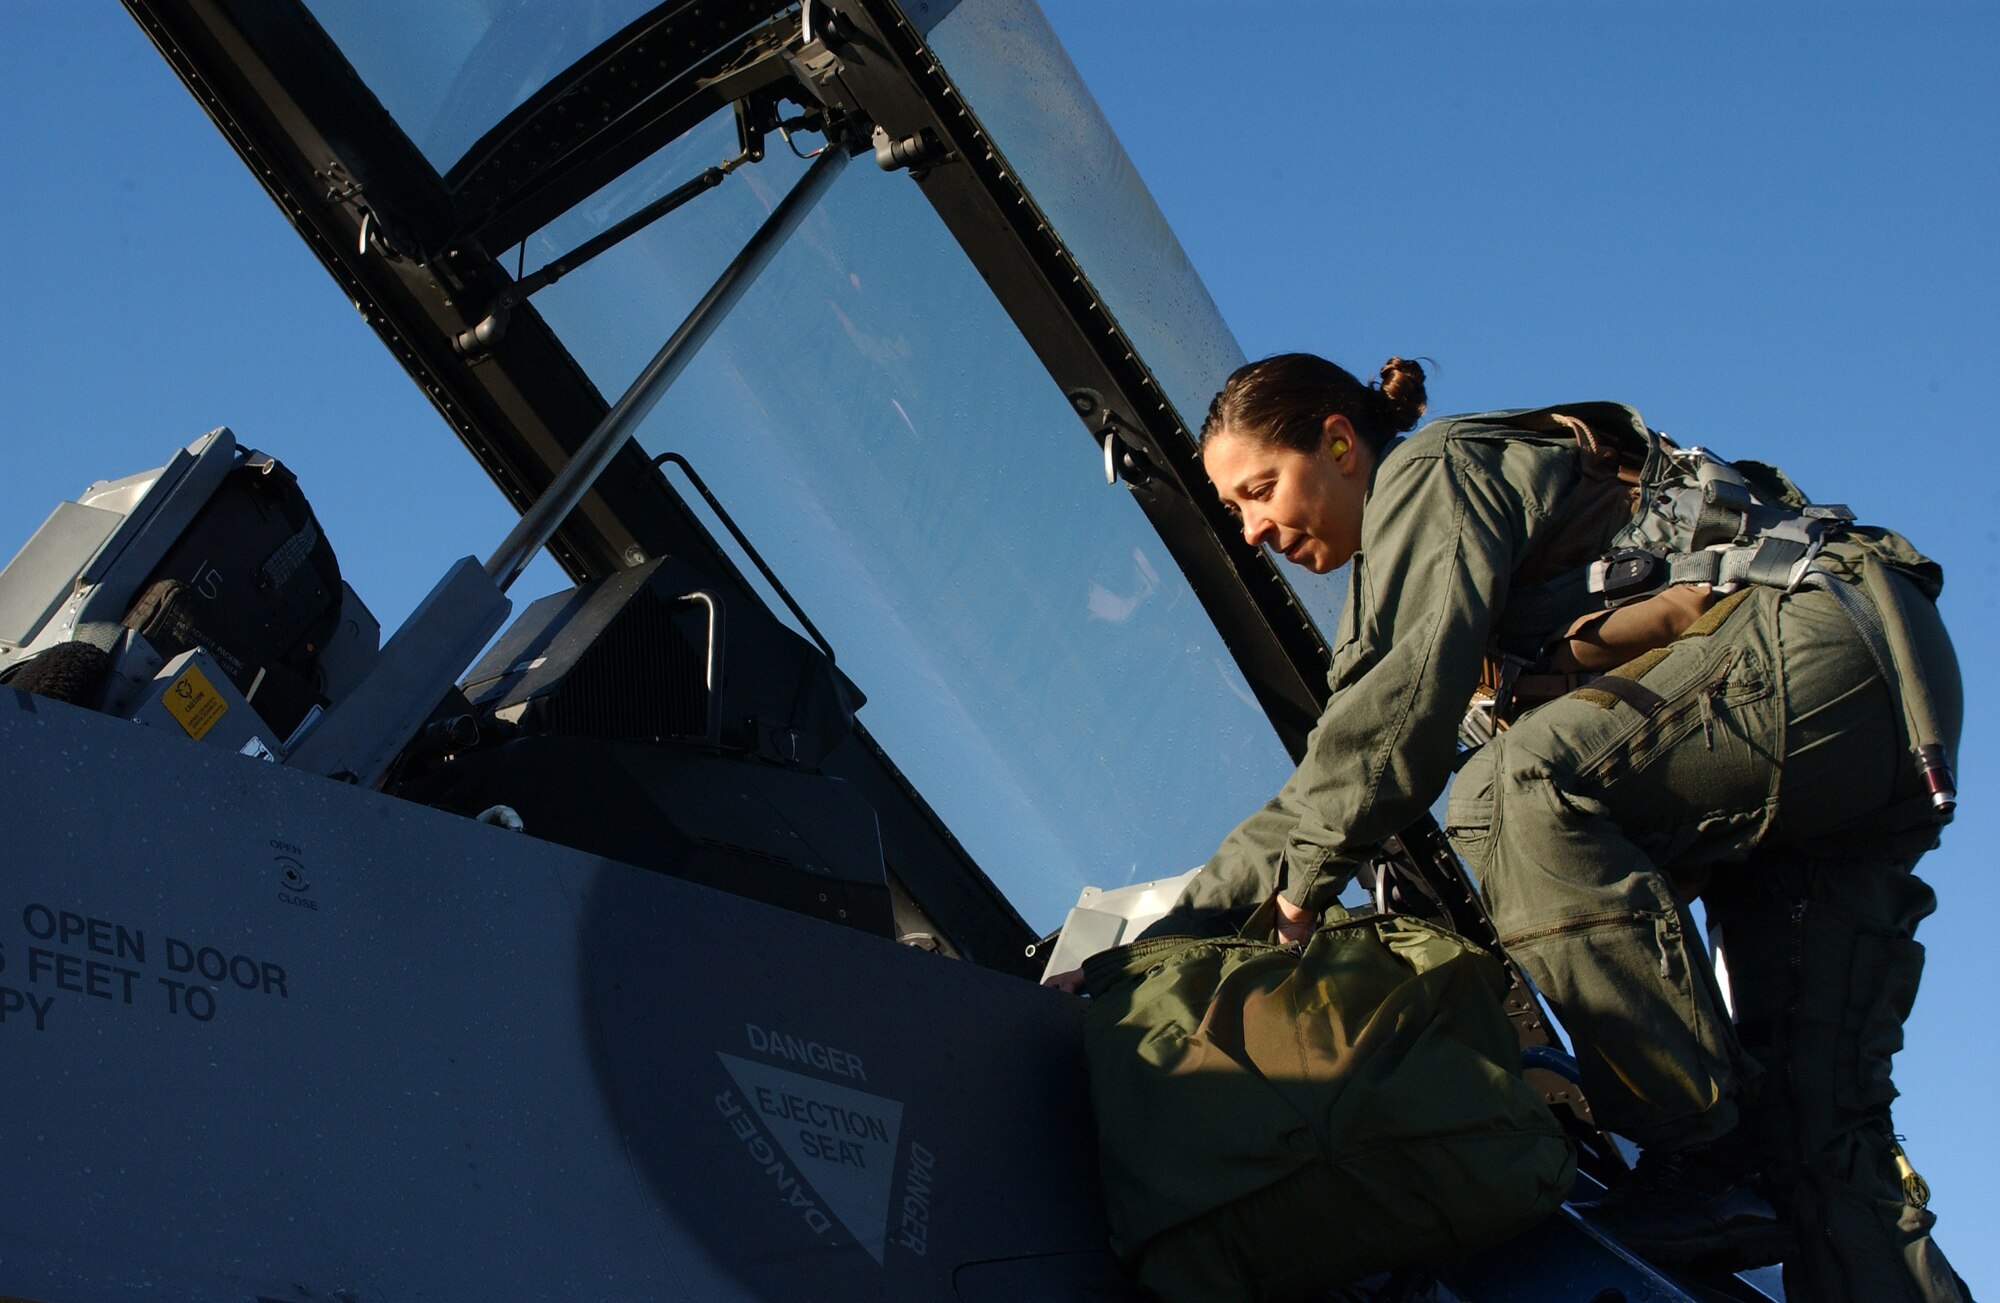 EIELSON AIR FORCE BASE, Alaska--Master Sgt. Deanna Croxen, Eielson Airman Leadership School instructor, climbs into the cockpit for her F-16 incentive ride Sept. 13. The incentive program's purpose is for group commanders to acknowledge the hard work and dedication of their Airmen. (U.S. Air Force photo by Airman 1st Class Nora Anton)                               